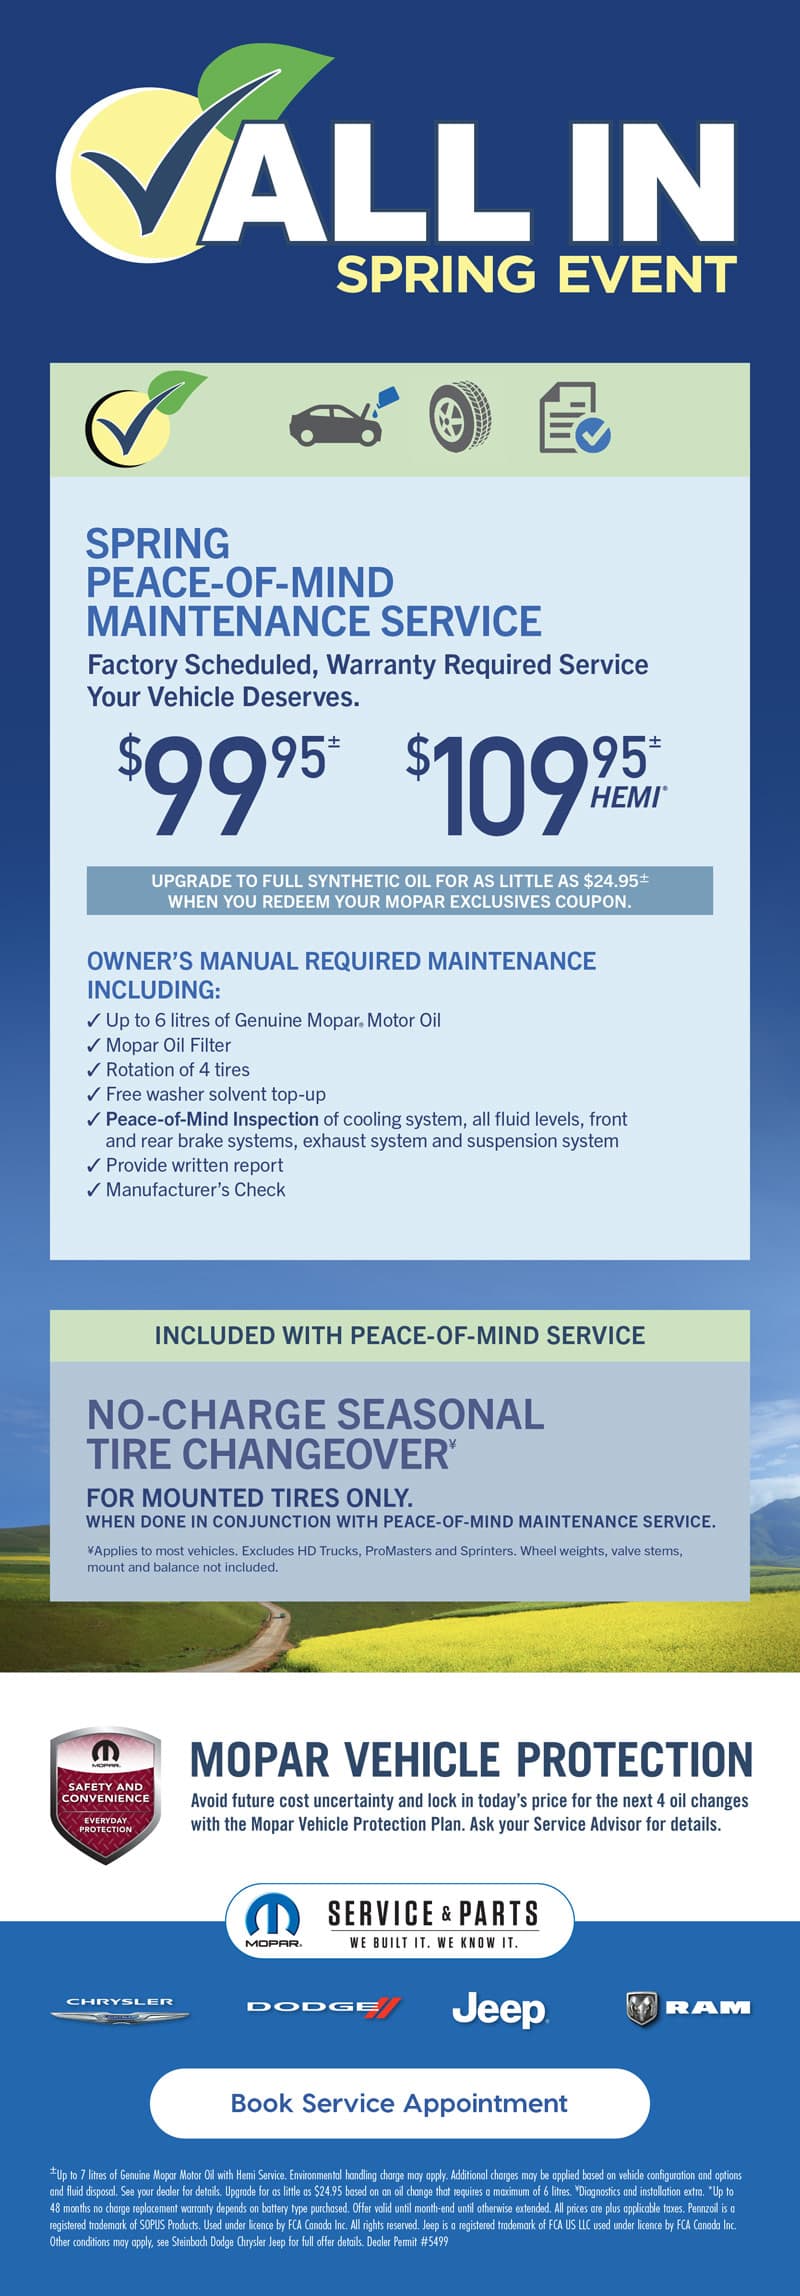 ±Up to 7 litres of Genuine Mopar Motor Oil with Hemi Service. Environmental handling charge may apply. Additional charges may be applied based on vehicle configuration and options and fluid disposal. See your dealer for details. Upgrade for as little as $24.95 based on an oil change that requires a maximum of 6 litres. ¥Diagnostics and installation extra. *Up to 48 months no charge replacement warranty depends on battery type purchased. Offer valid until month-end until otherwise extended. All prices are plus applicable taxes. Pennzoil is a registered trademark of SOPUS Products. Used under licence by FCA Canada Inc. All rights reserved. Jeep is a registered trademark of FCA US LLC used under licence by FCA Canada Inc. Other conditions may apply, see Steinbach Dodge Chrysler Jeep for full offer details. Dealer Permit #5499 ALL IN SPRING EVENT OWNER’S MANUAL REQUIRED MAINTENANCE INCLUDING: ✓ Up to 6 litres of Genuine Mopar® Motor Oil ✓ Mopar Oil Filter ✓ Rotation of 4 tires ✓ Free washer solvent top-up ✓ Peace-of-Mind Inspection of cooling system, all fluid levels, front and rear brake systems, exhaust system and suspension system ✓ Provide written report ✓ Manufacturer’s Check SPRING PEACE-OF-MIND MAINTENANCE SERVICE Factory Scheduled, Warranty Required Service Your Vehicle Deserves. $9995± $10995± HEMI® UPGRADE TO FULL SYNTHETIC OIL FOR AS LITTLE AS $24.95± WHEN YOU REDEEM YOUR MOPAR EXCLUSIVES COUPON. ¥Applies to most vehicles. Excludes HD Trucks, ProMasters and Sprinters. Wheel weights, valve stems, mount and balance not included. FOR MOUNTED TIRES ONLY. WHEN DONE IN CONJUNCTION WITH PEACE-OF-MIND MAINTENANCE SERVICE. NO-CHARGE SEASONAL TIRE CHANGEOVER¥ INCLUDED WITH PEACE-OF-MIND SERVICE Book Service Appointment